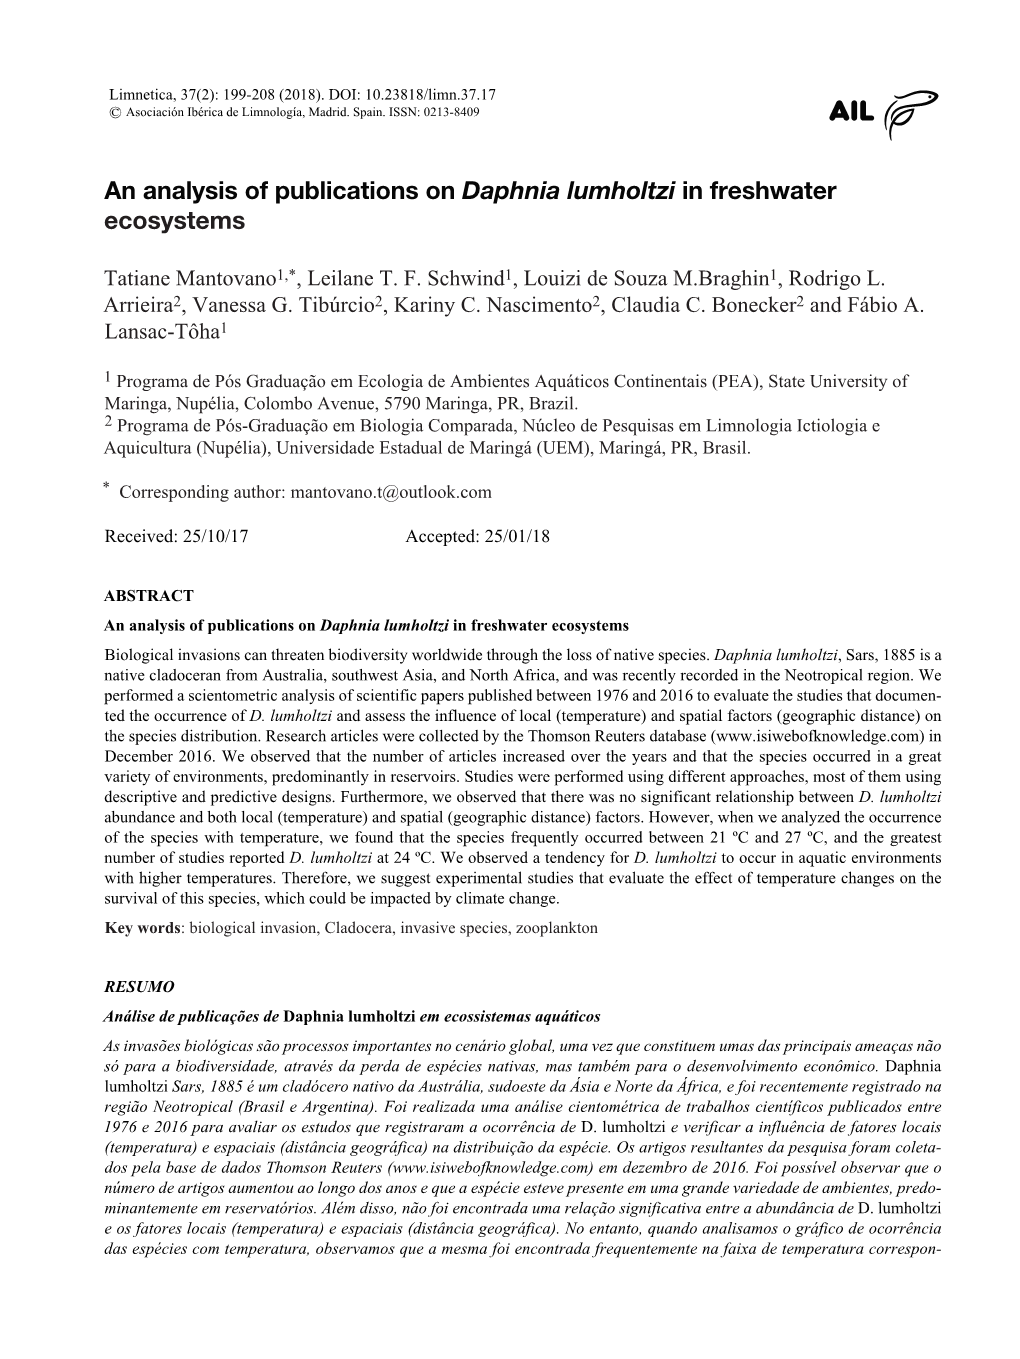 An Analysis of Publications on Daphnia Lumholtzi in Freshwater Ecosystems